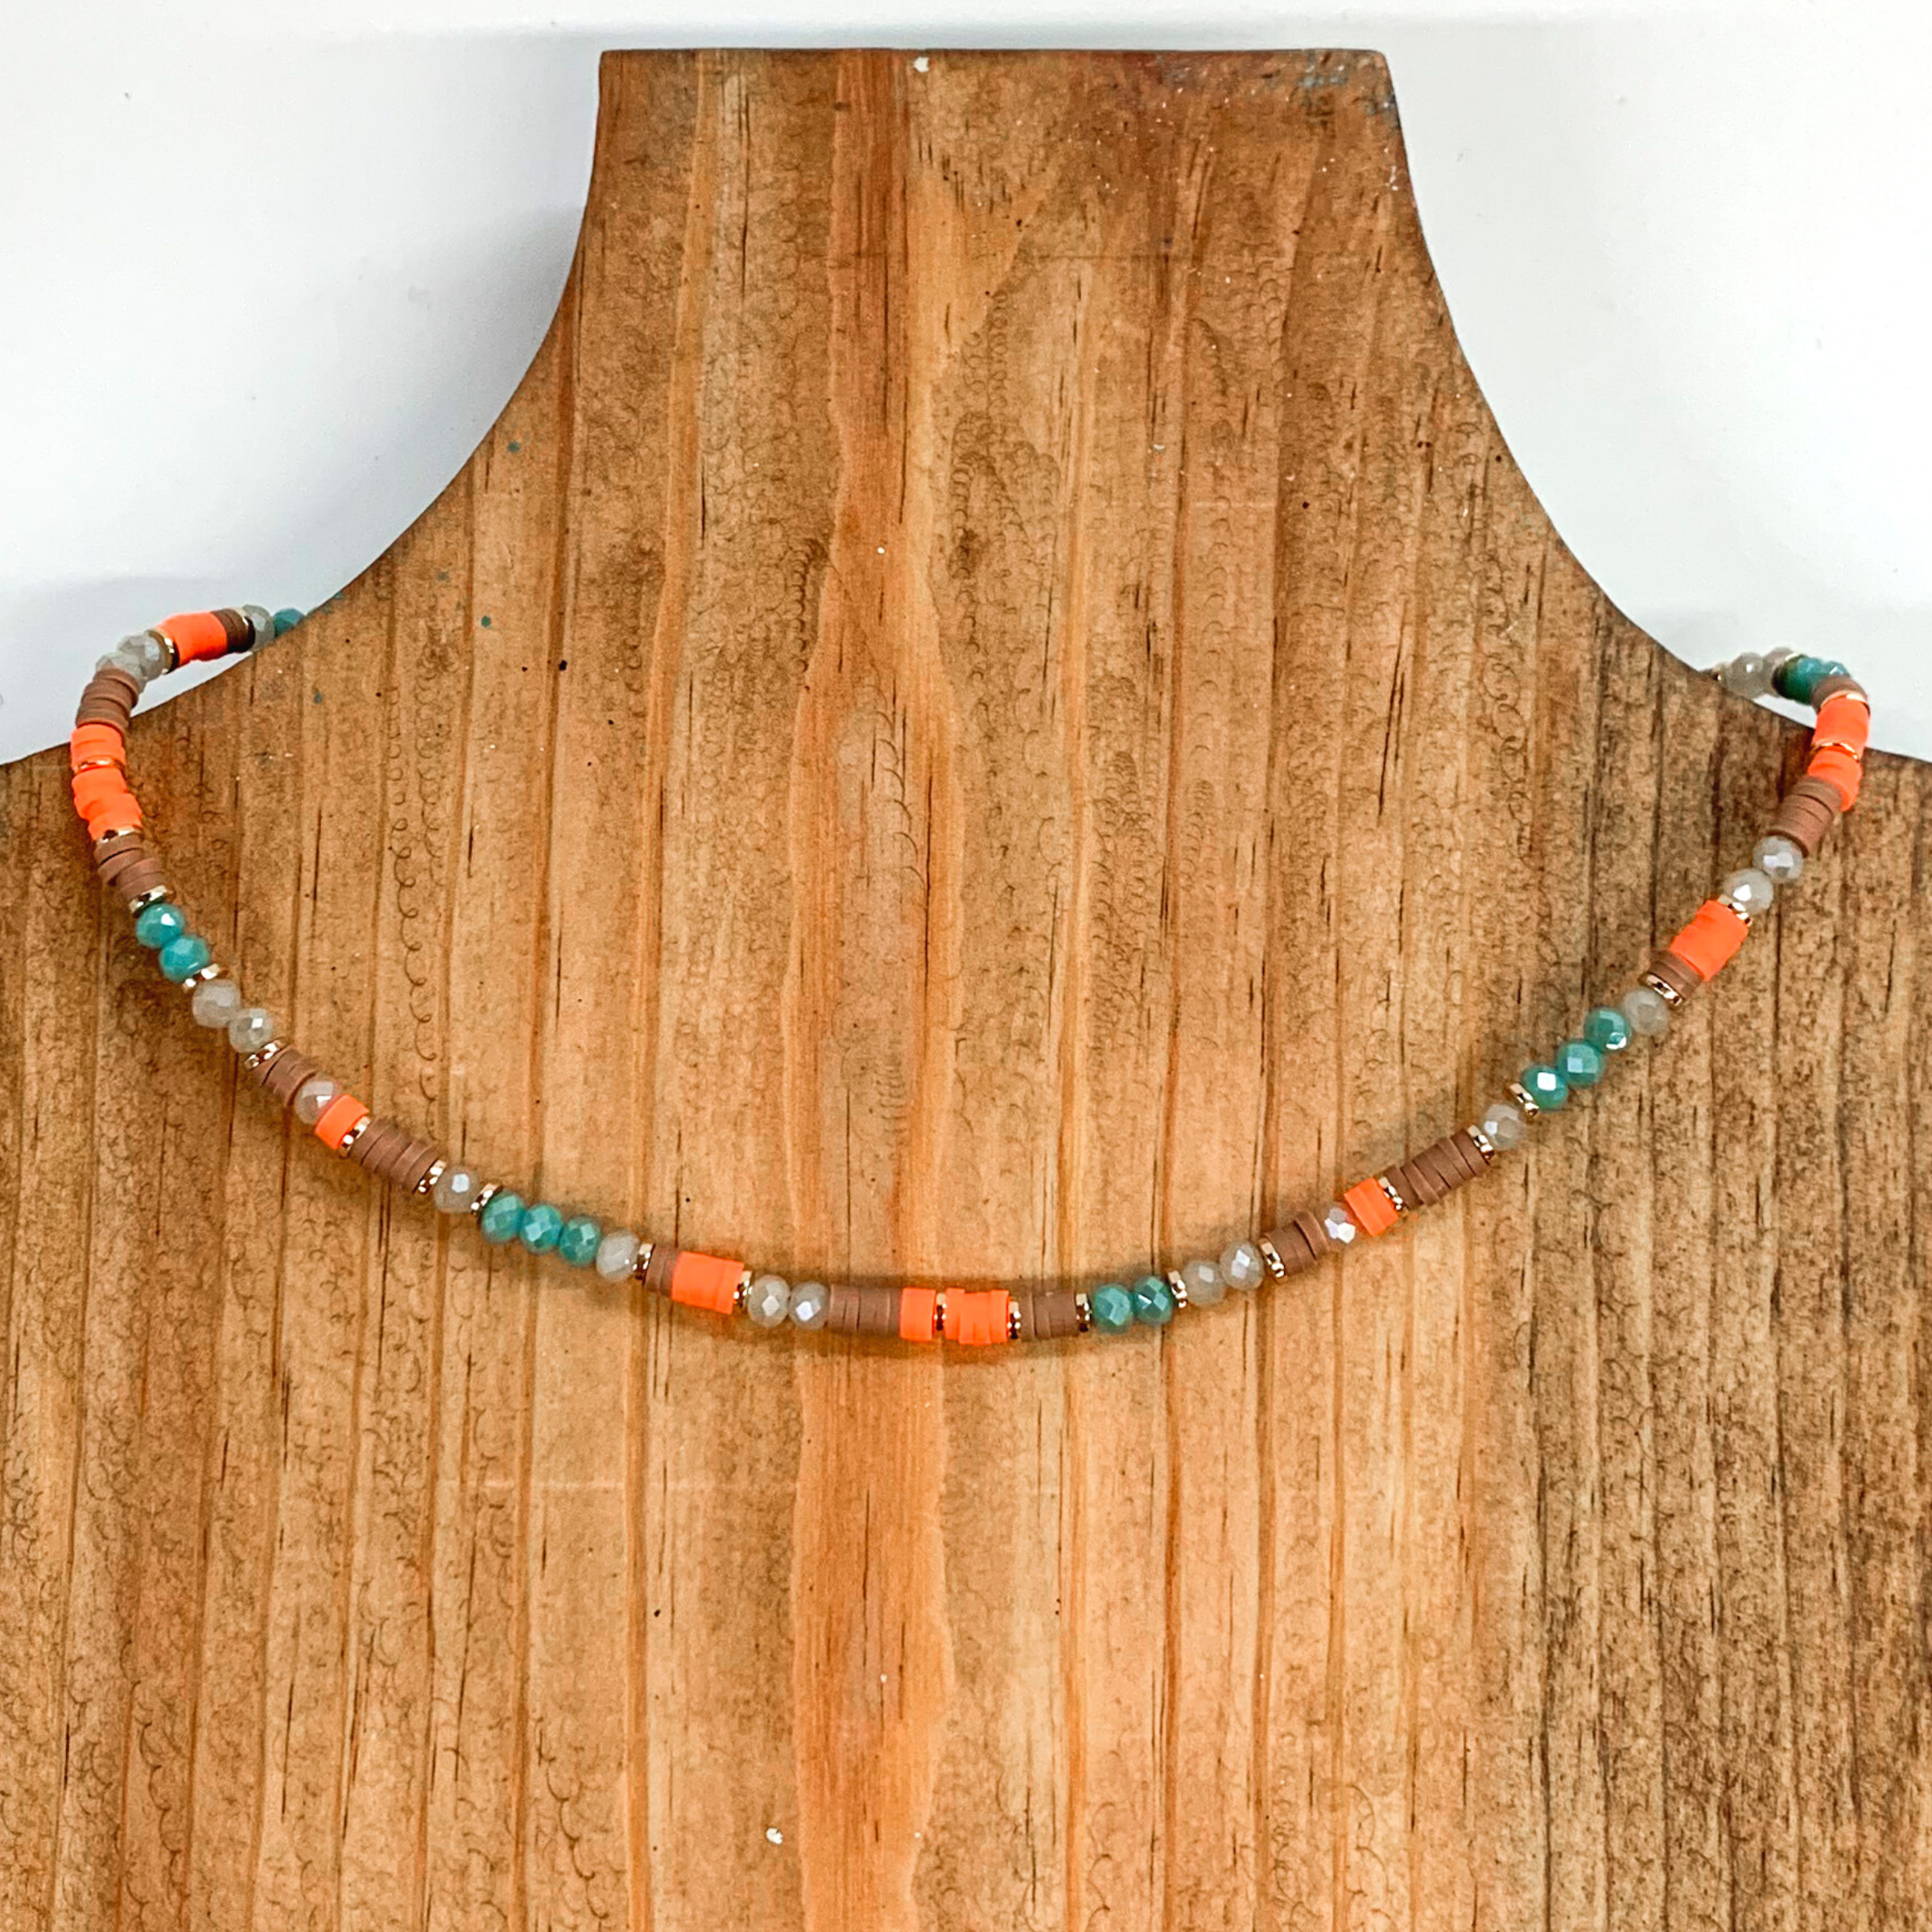 This necklace has segments of crystal beads and rubber beads with gold bead spacers. This necklace includes the crystal beads in the colors teal and a dark beige. The rubber beads come in the colors tan and coral. This necklace is pictured on a laying on a brown necklace holder on a white background.